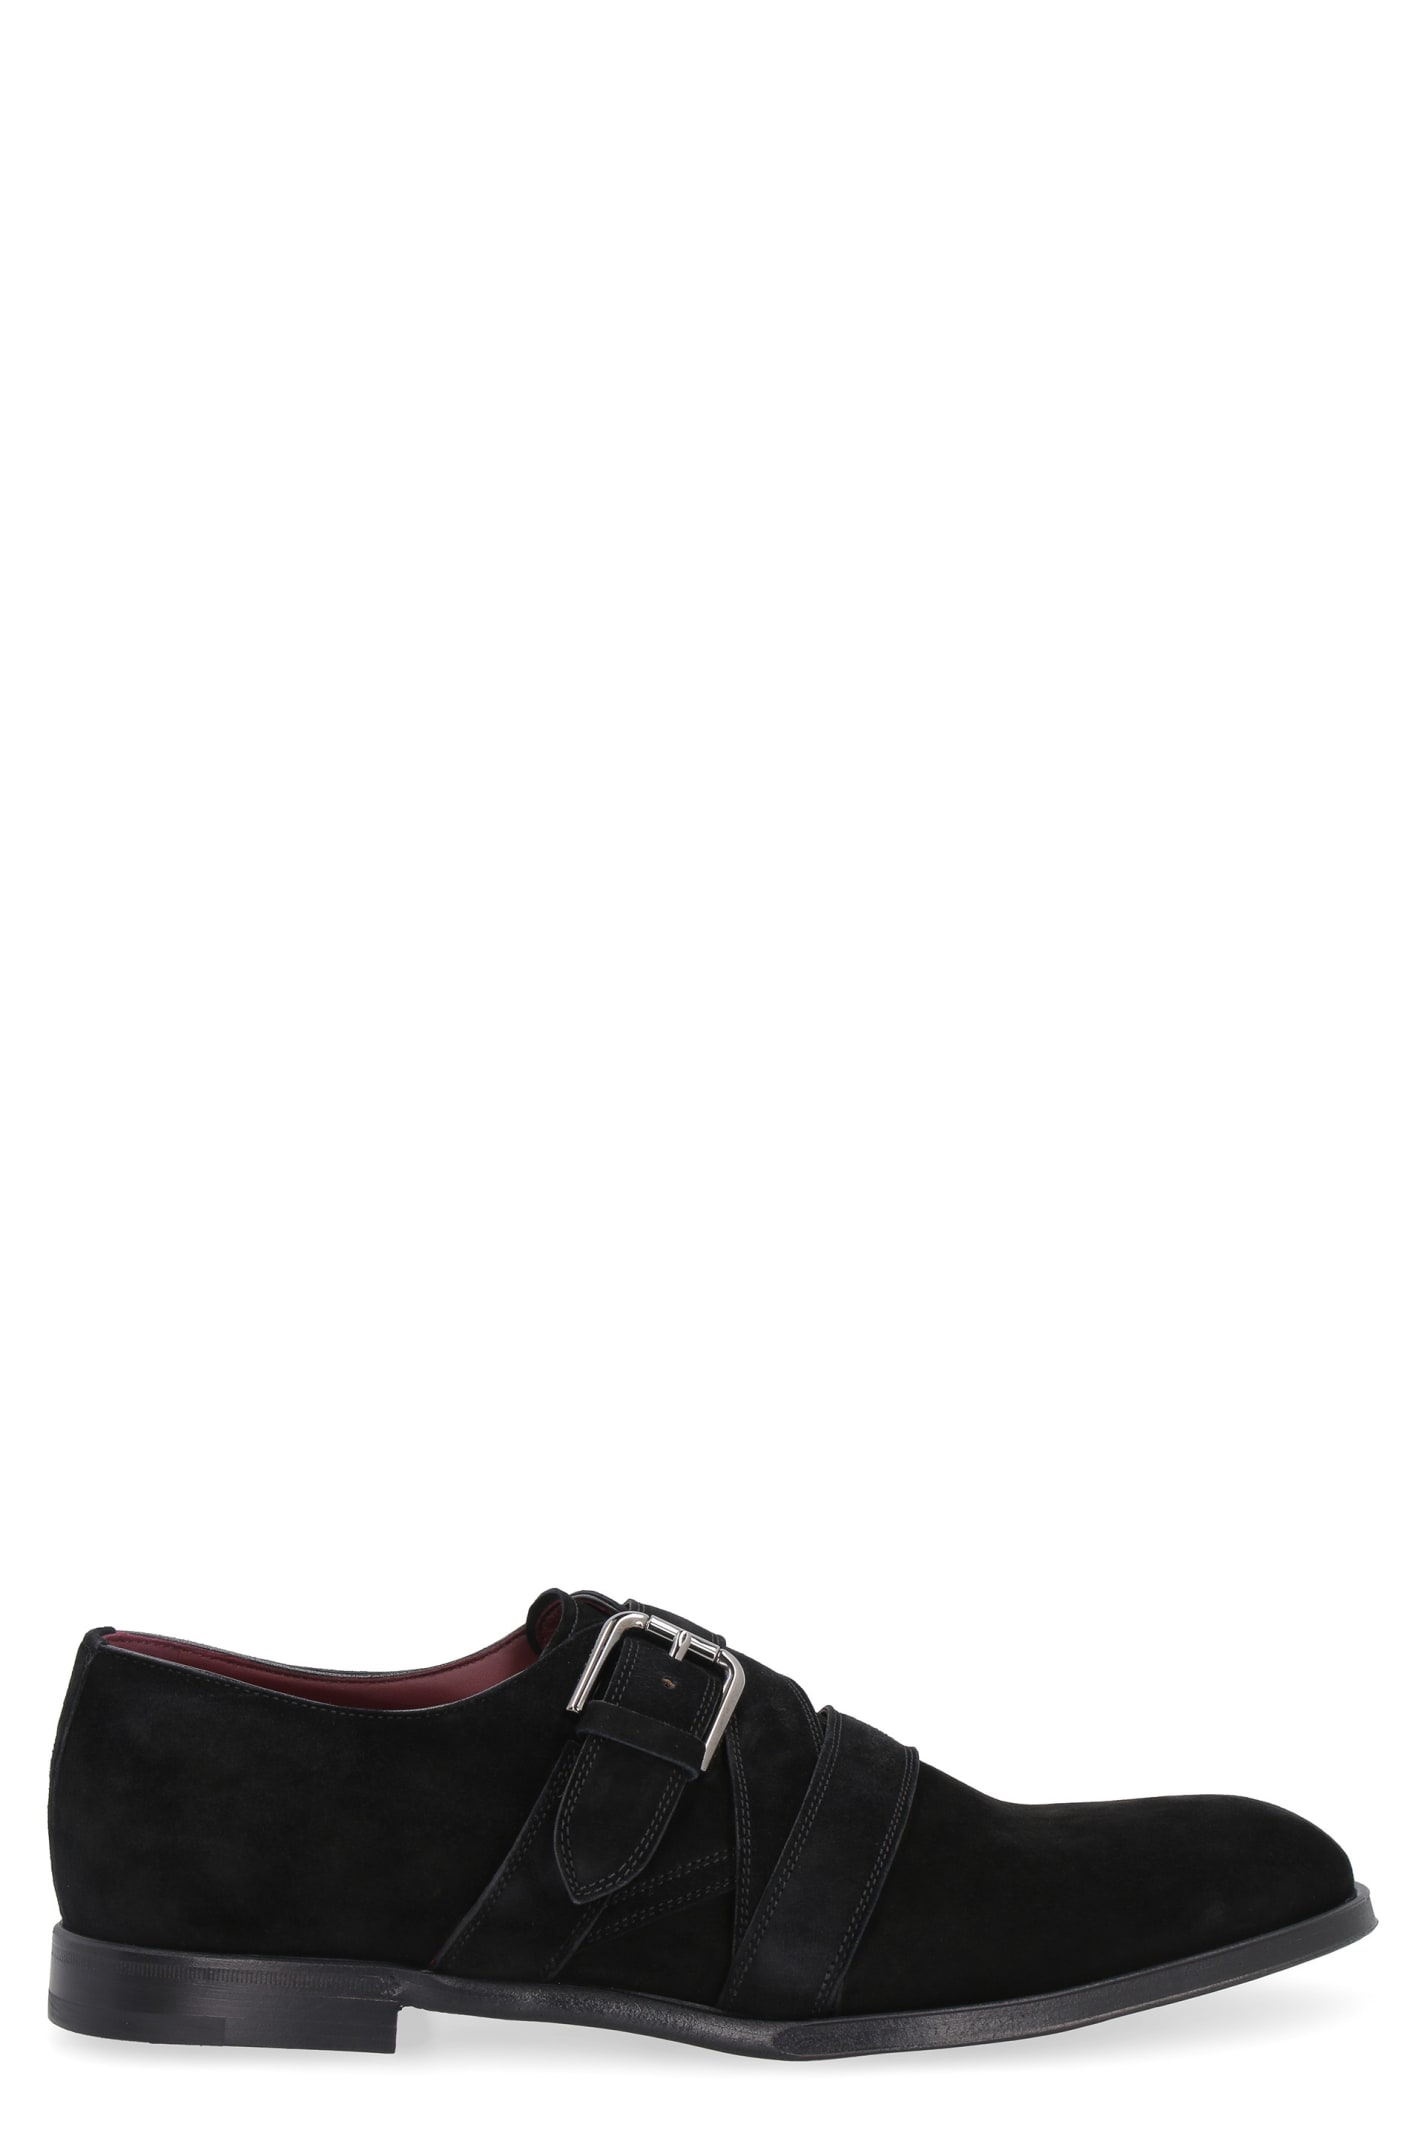 Dolce & Gabbana Suede Monk-strap Shoes In Black